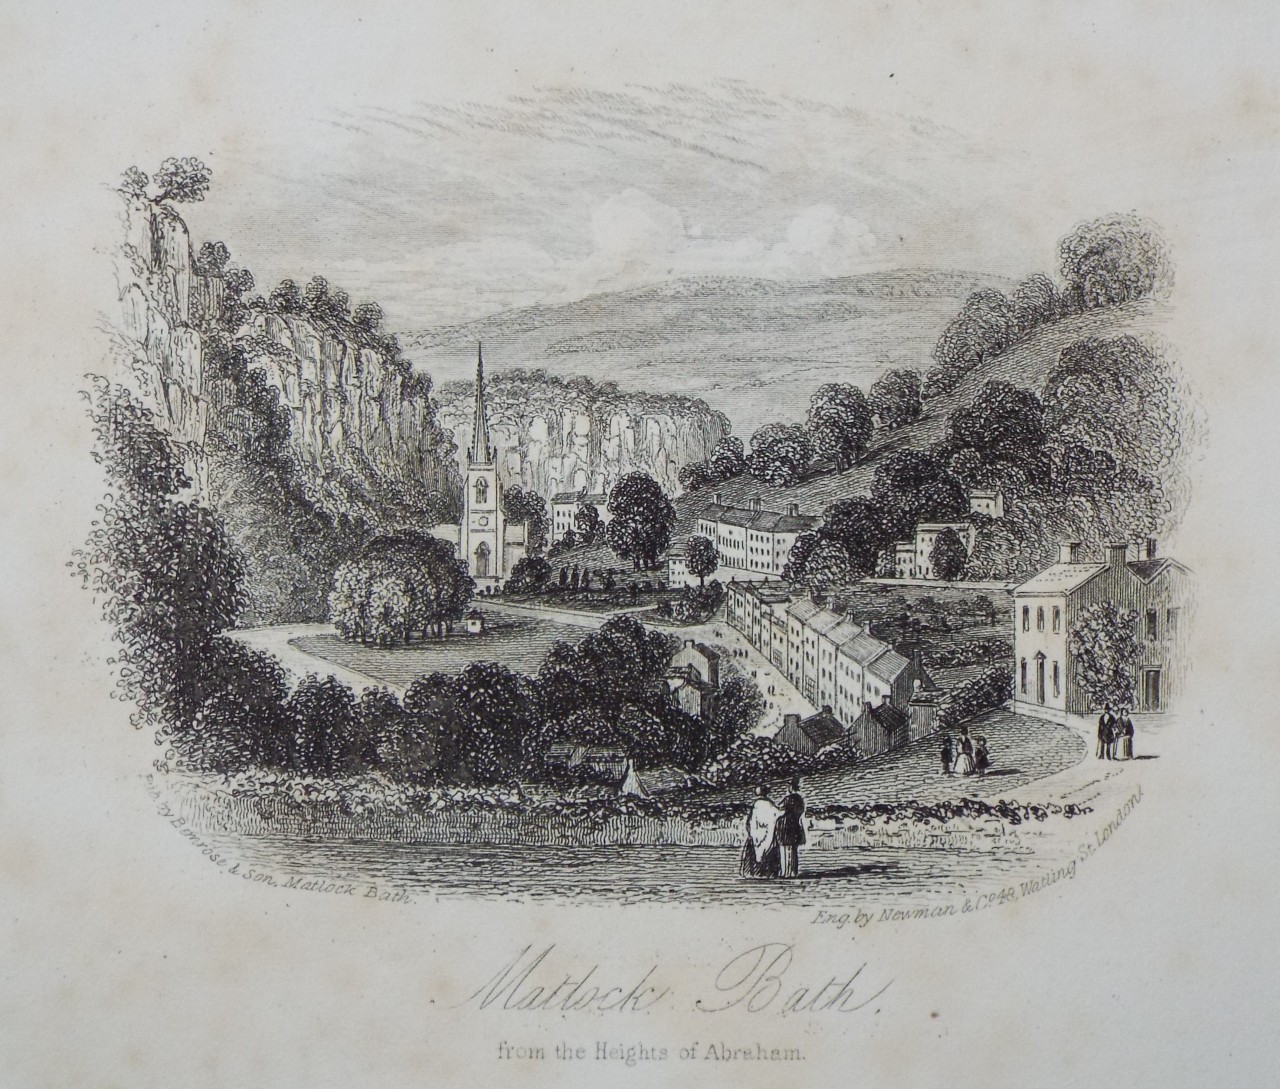 Steel Vignette - Matlock Bath, from the Heights of Abraham. - Newman